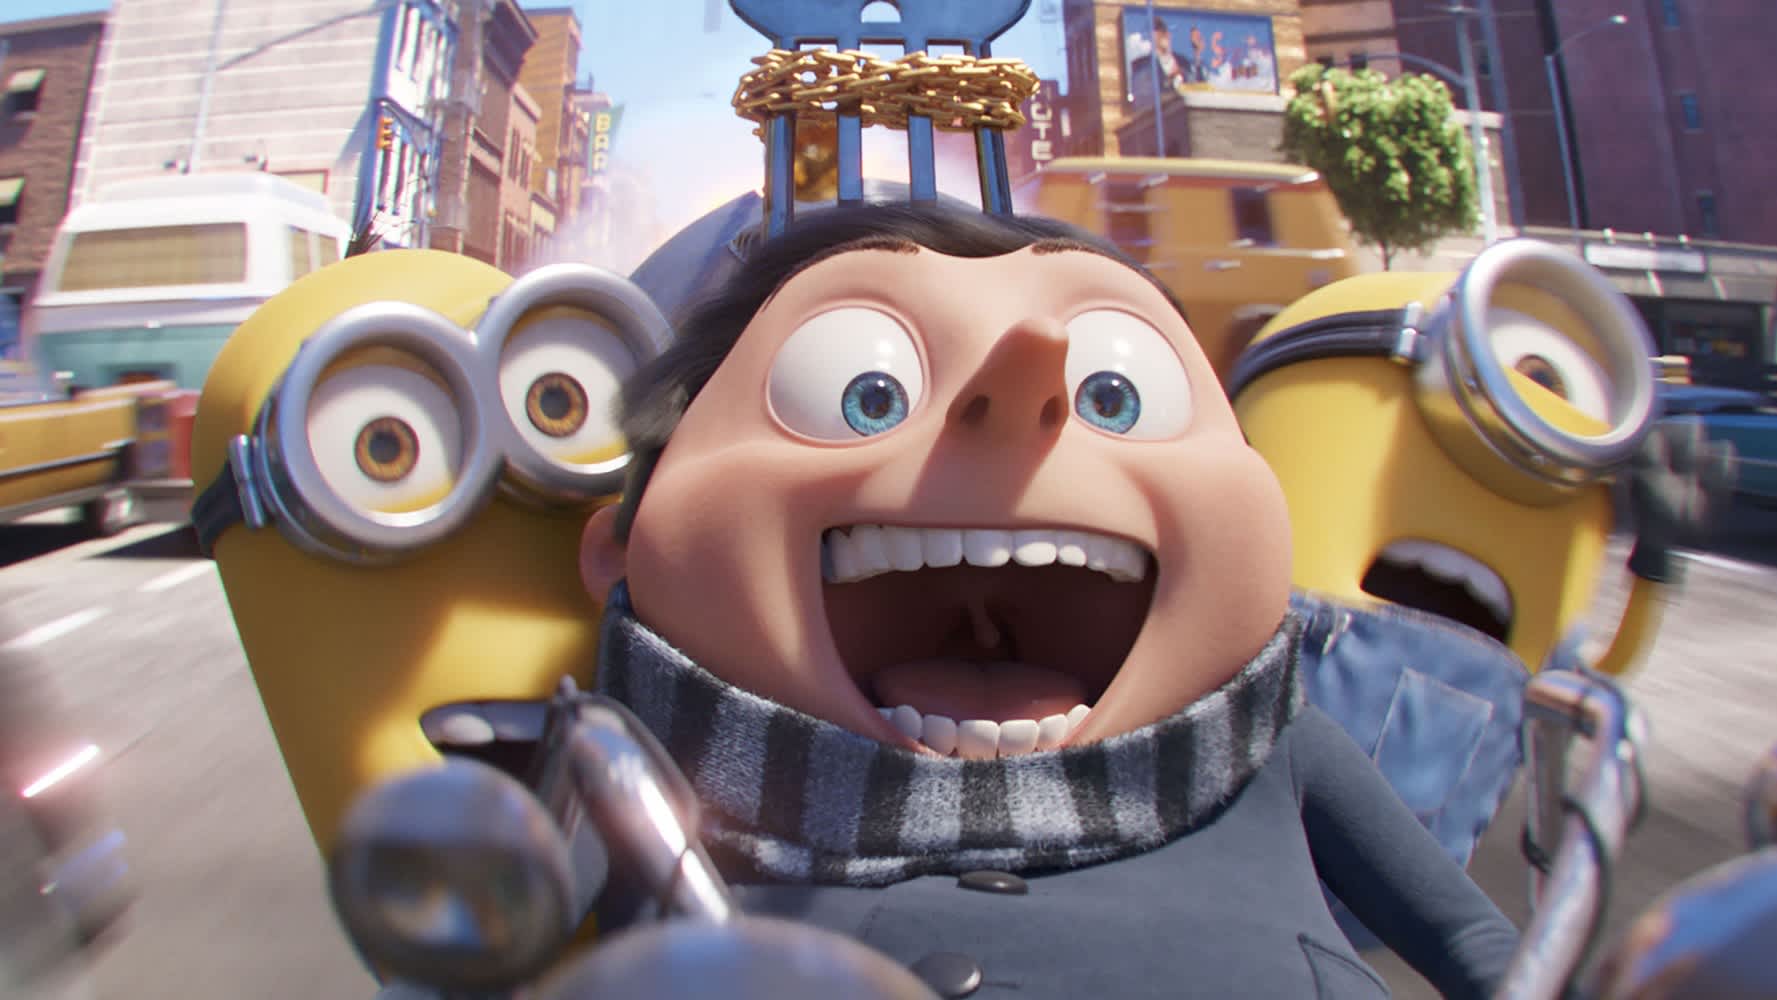 watch the minions full movie online